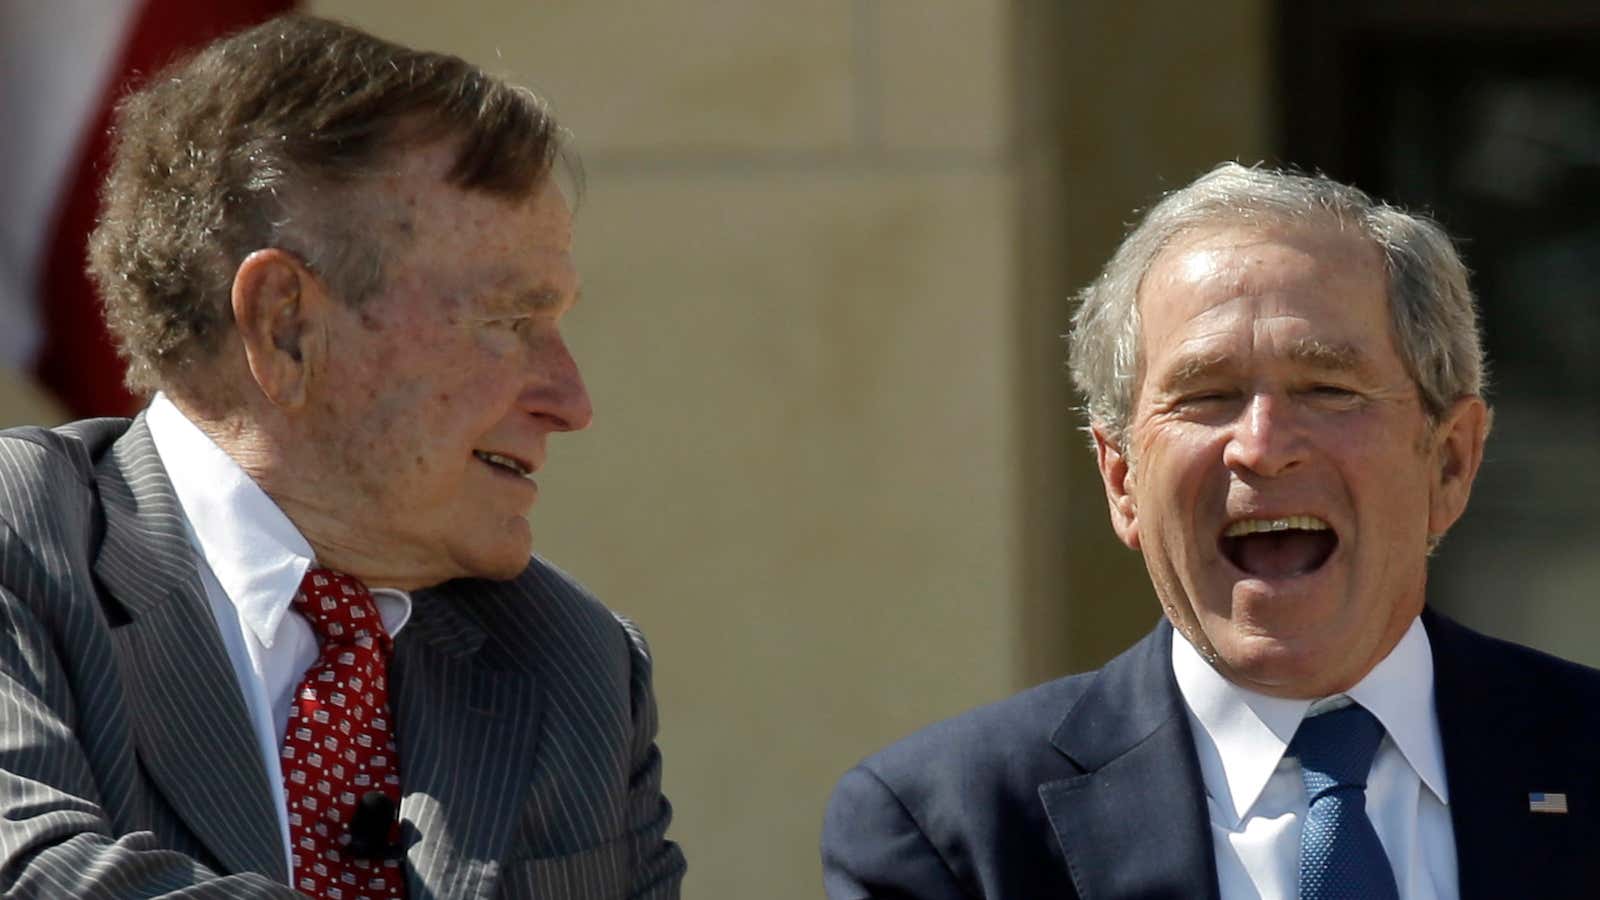 Iraq has marred the legacy of two Bush presidents and a would-be third.